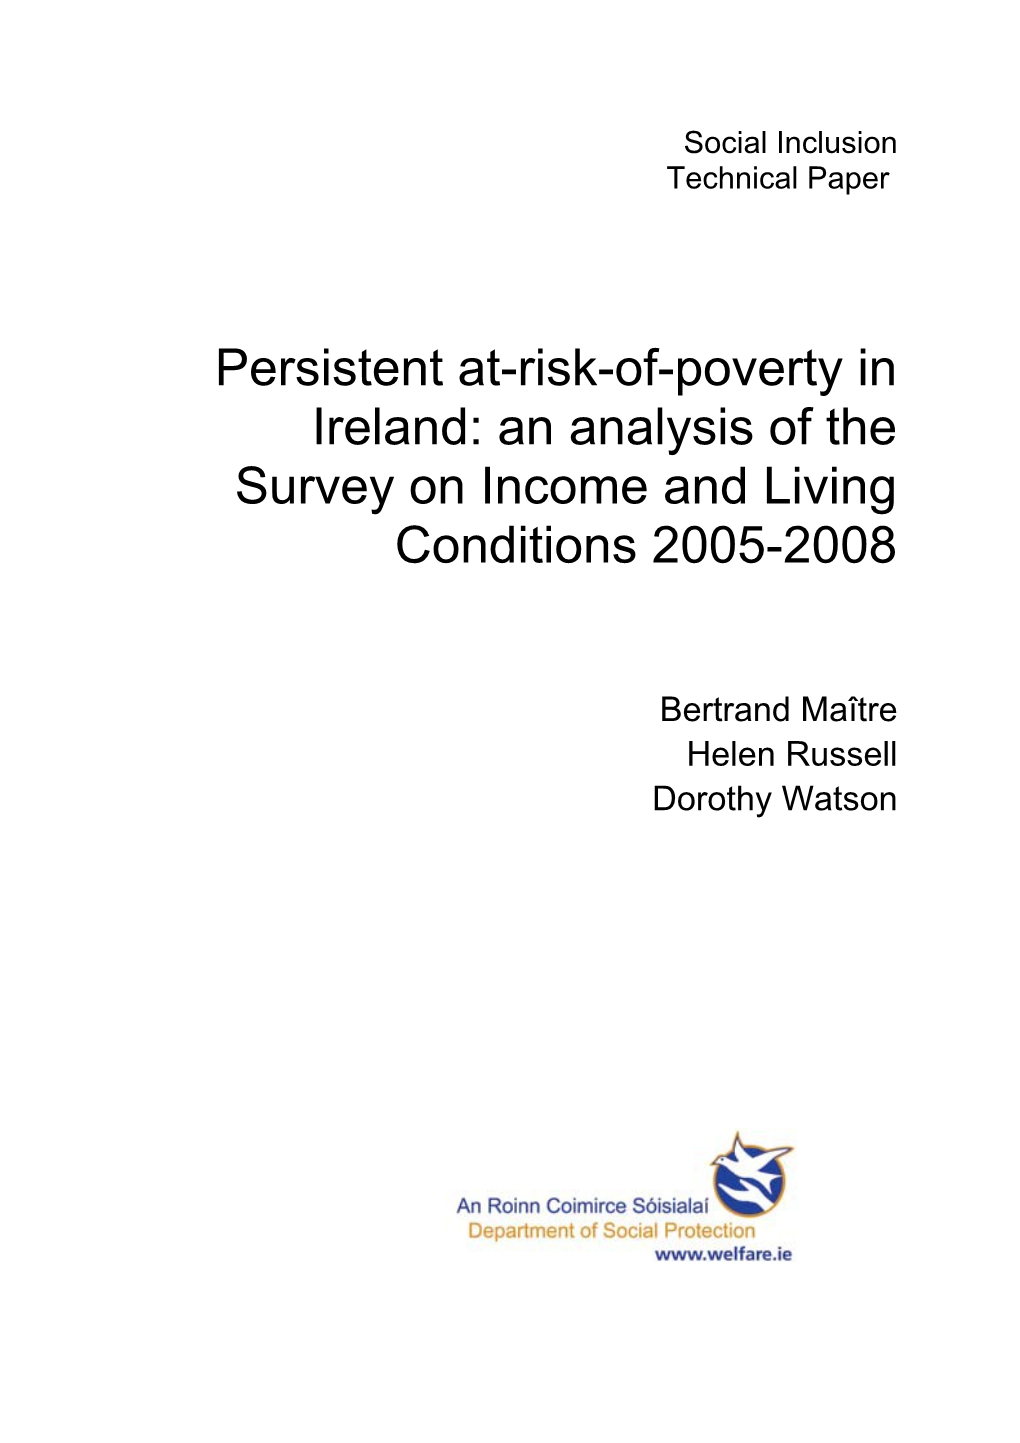 Social Inclusion Research Paper Persistent Poverty in Ireland: an Analysis of the EU SILC